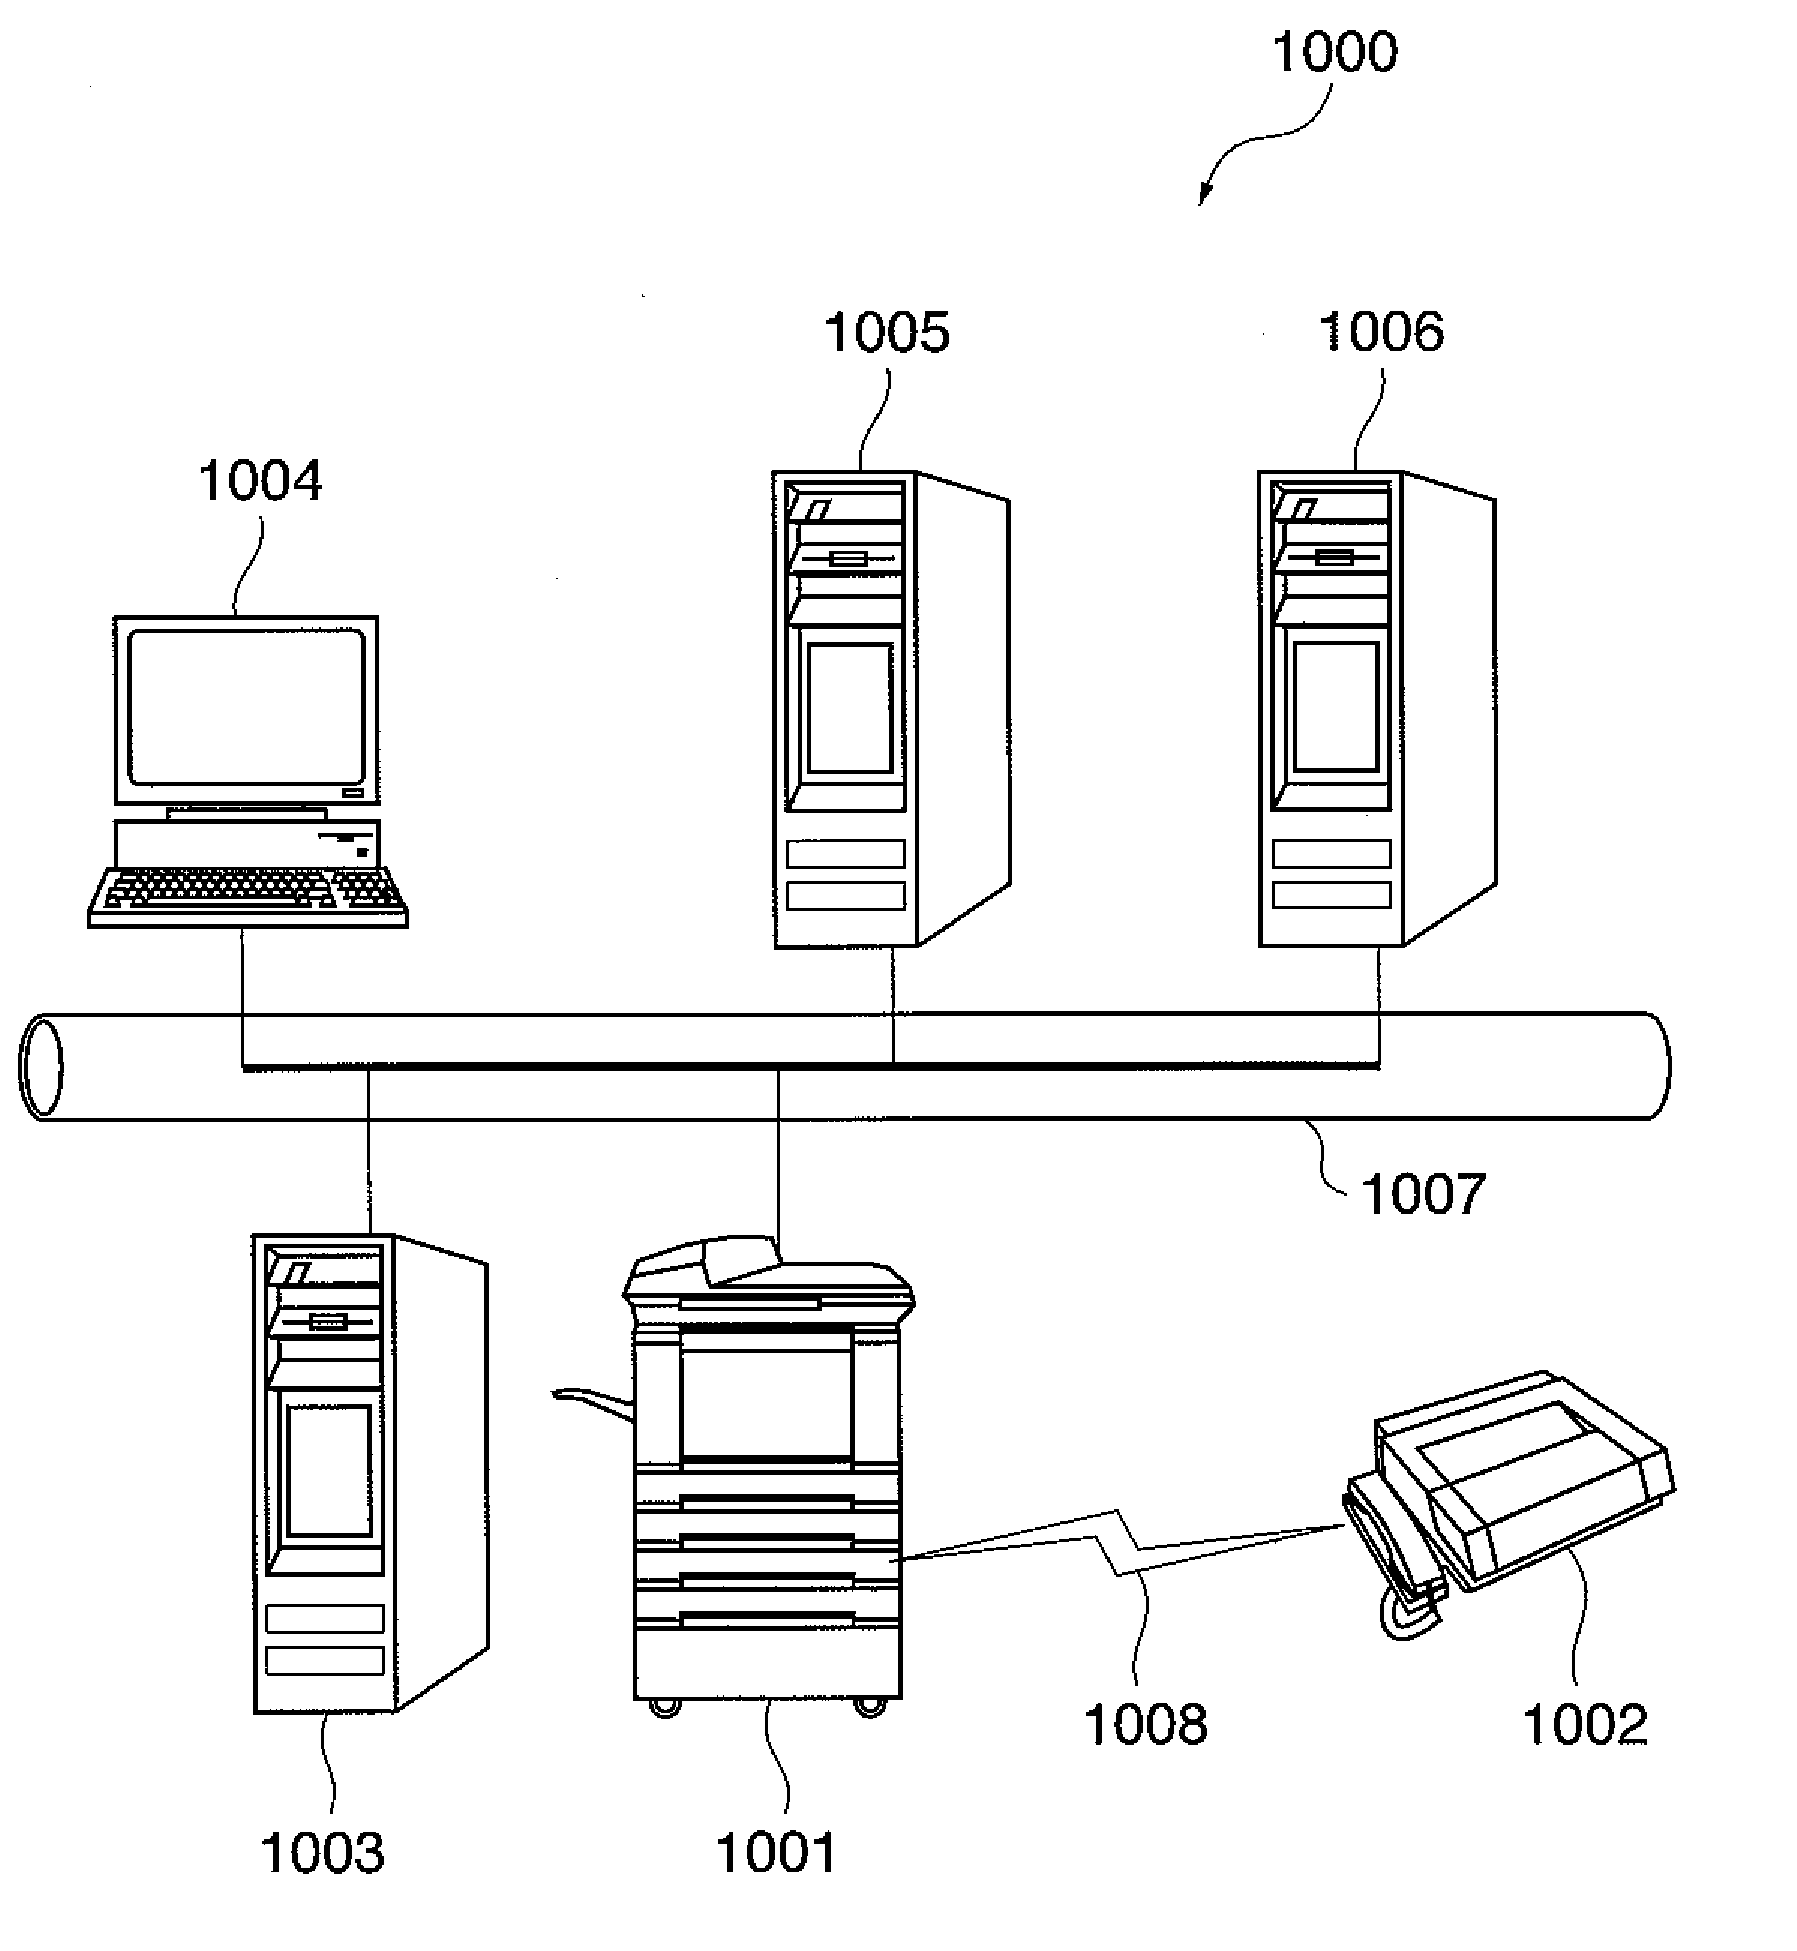 Image data search system, image data search apparatus, and image data search method, computer program for implementing the method, and storage medium storing the computer program